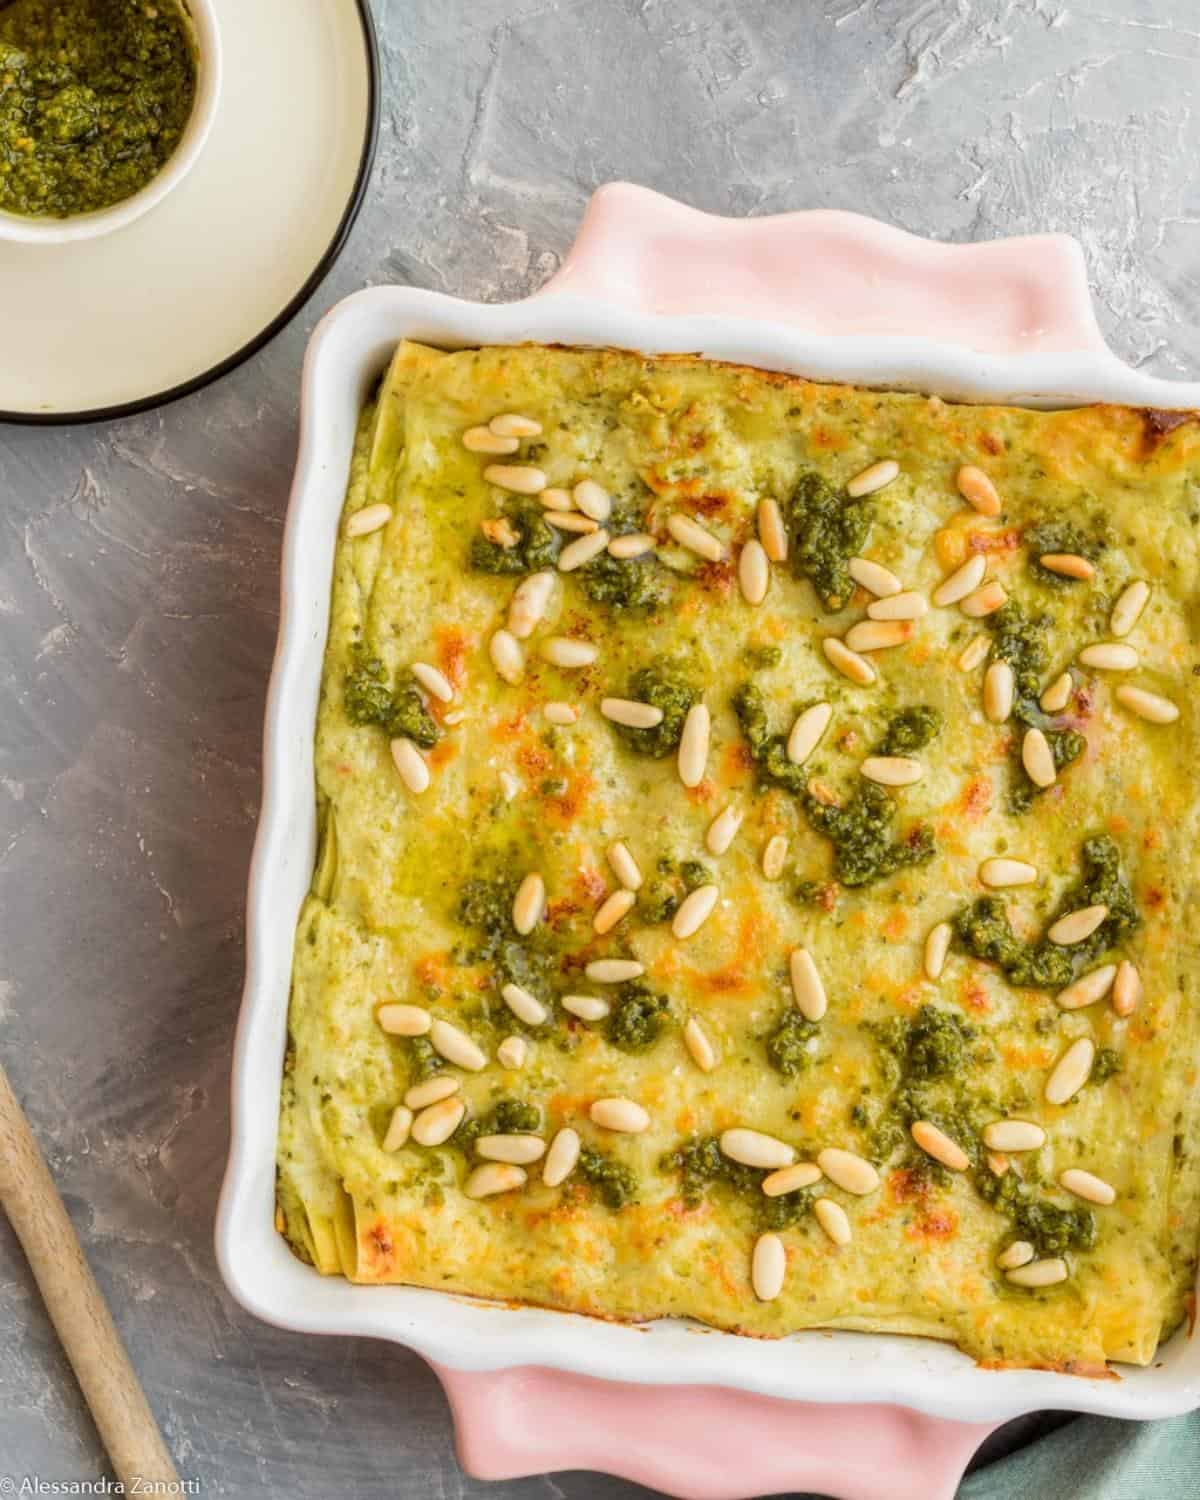 A close up from above of Pesto Lasagna in a pink pan. It is topped with pesto sauce and pine nuts